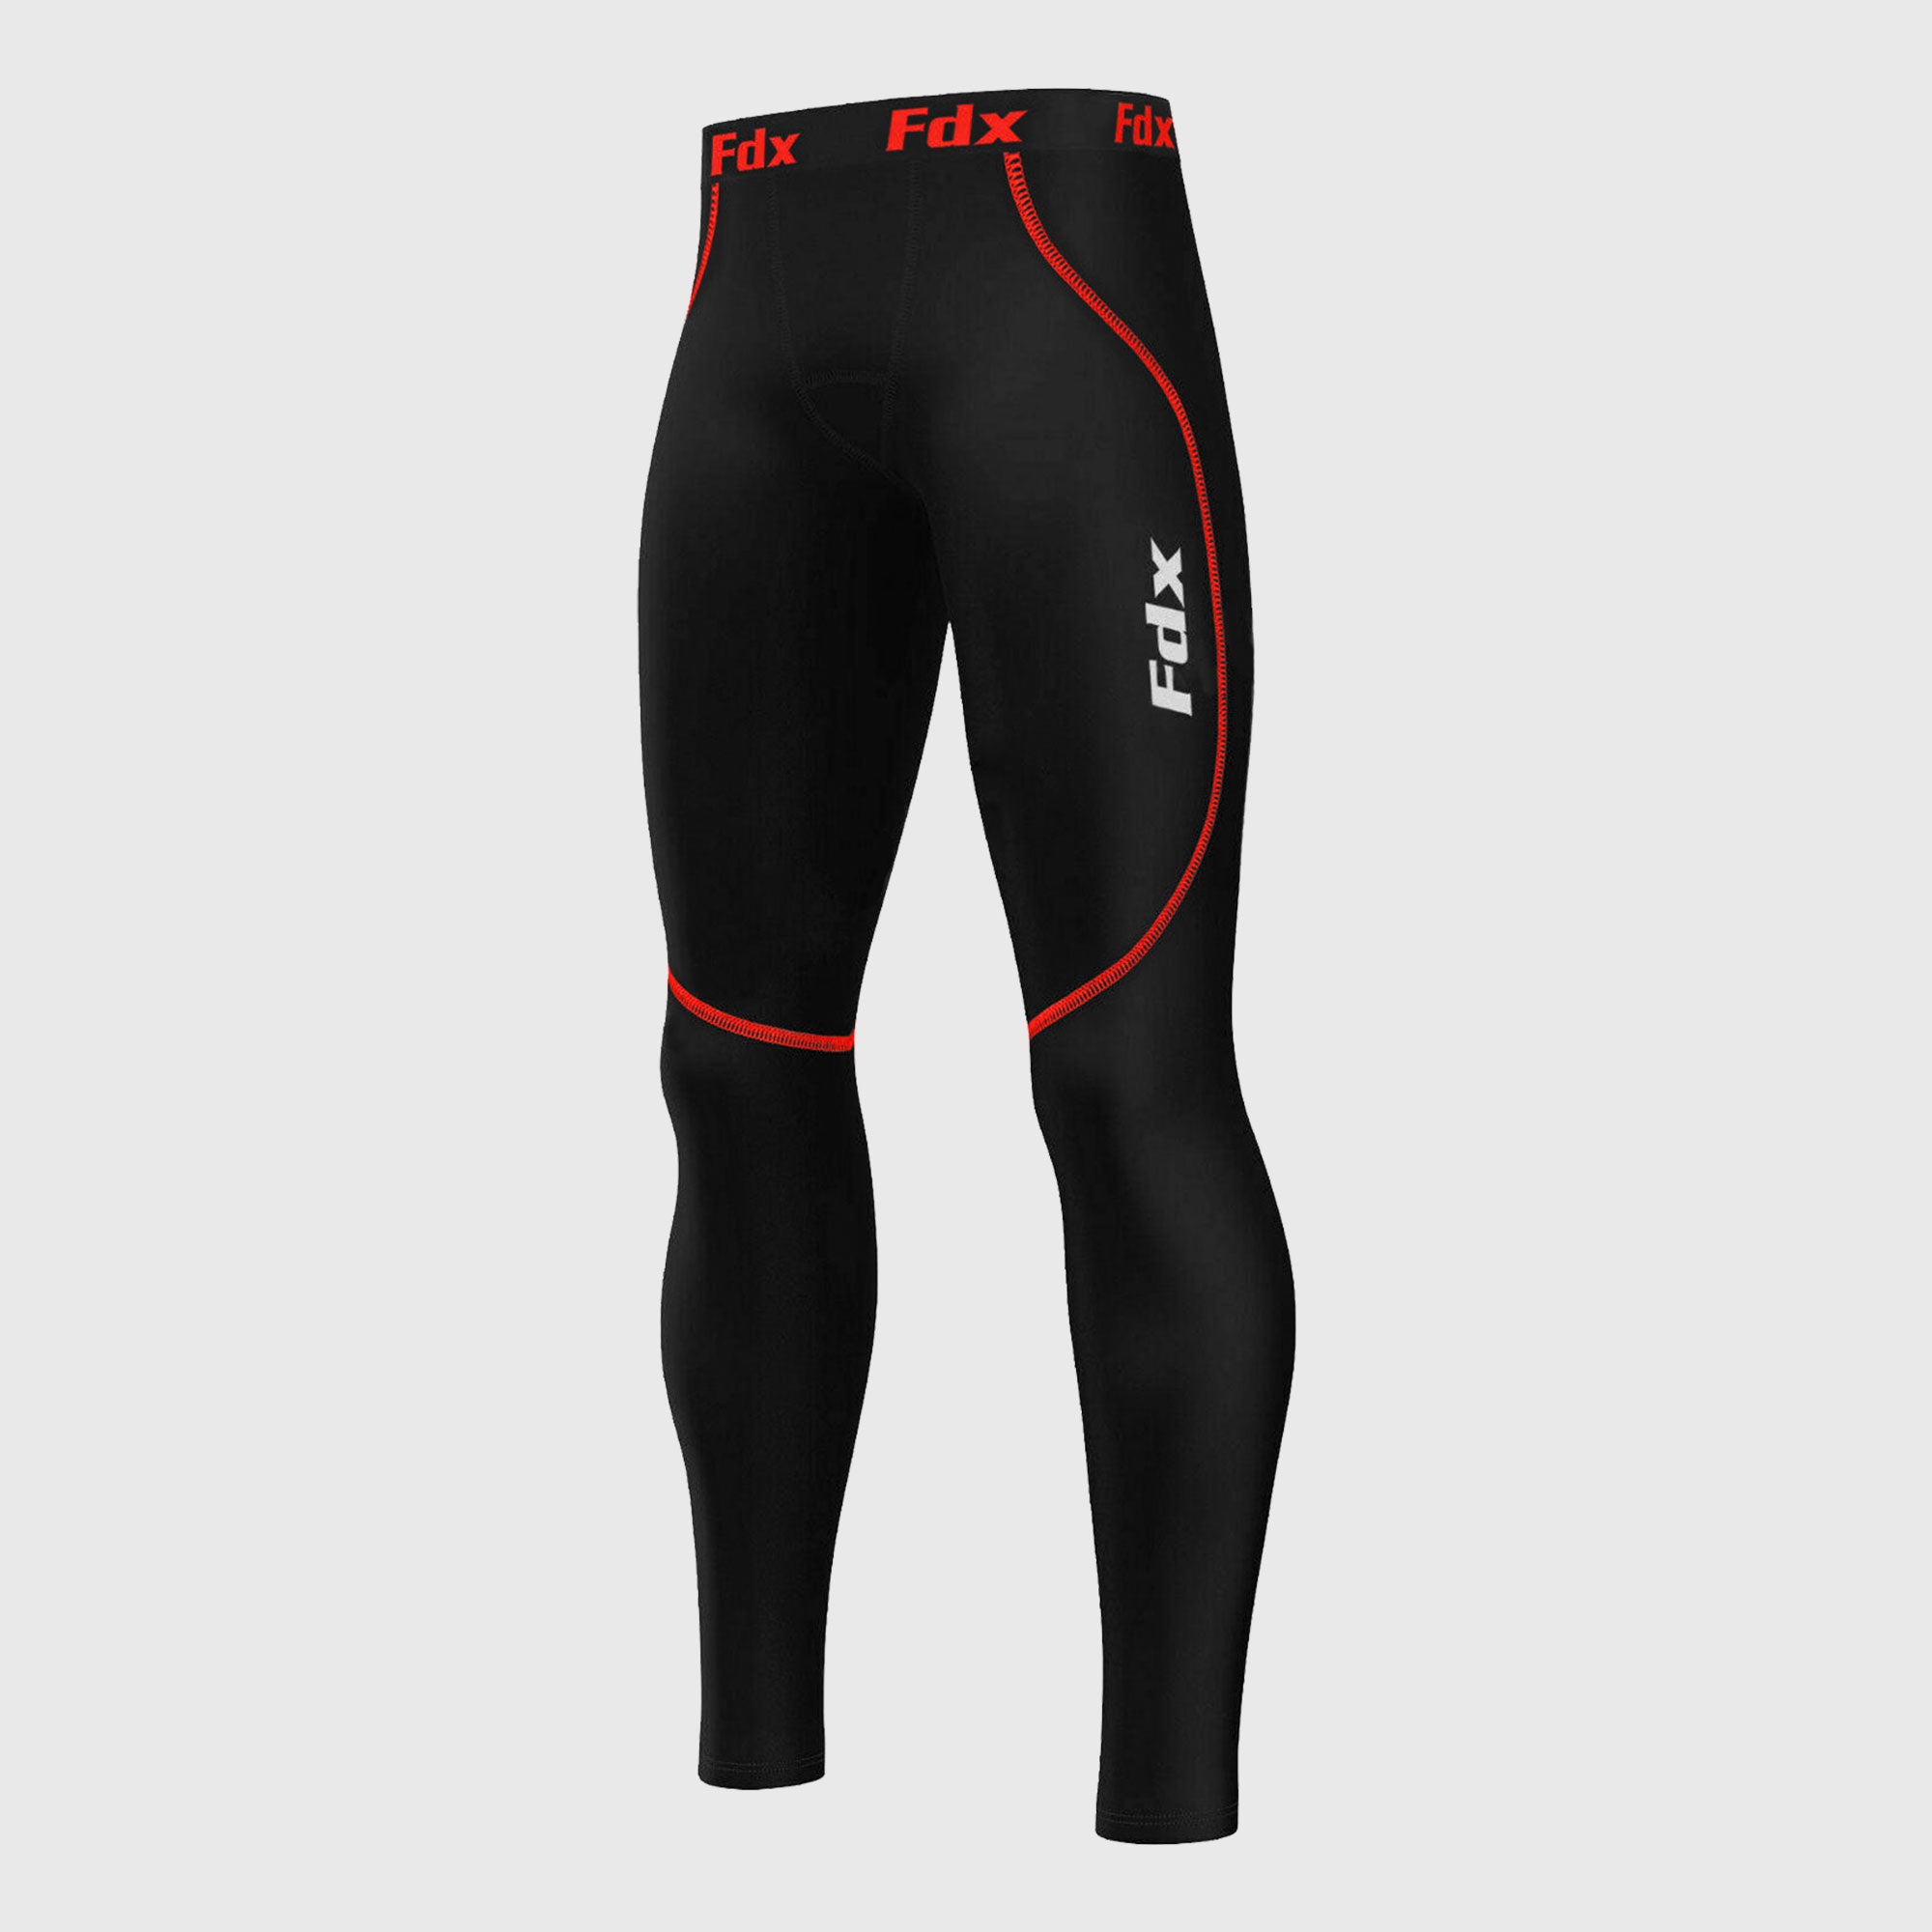 Men's Compression Under Base Layer Sports Workout Legging Trousers